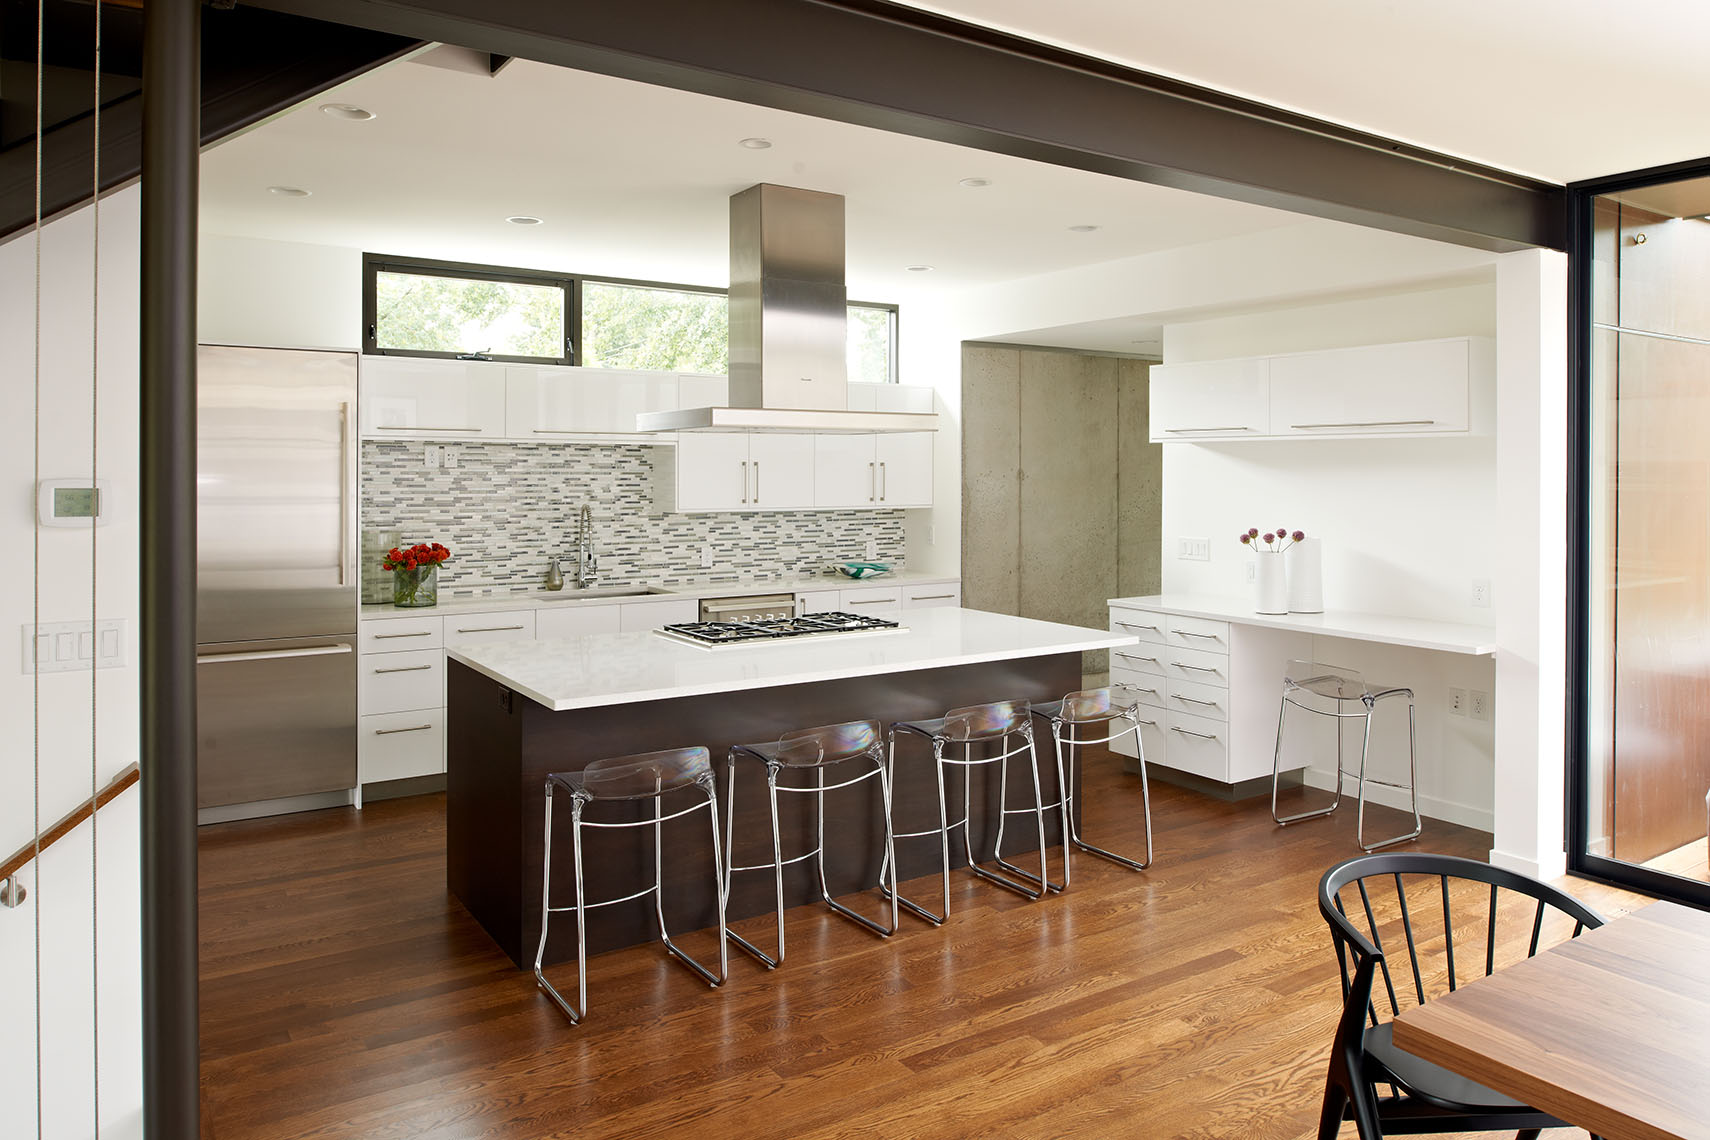 Modern bright kitchen with white cabinetry and center breakfast bar